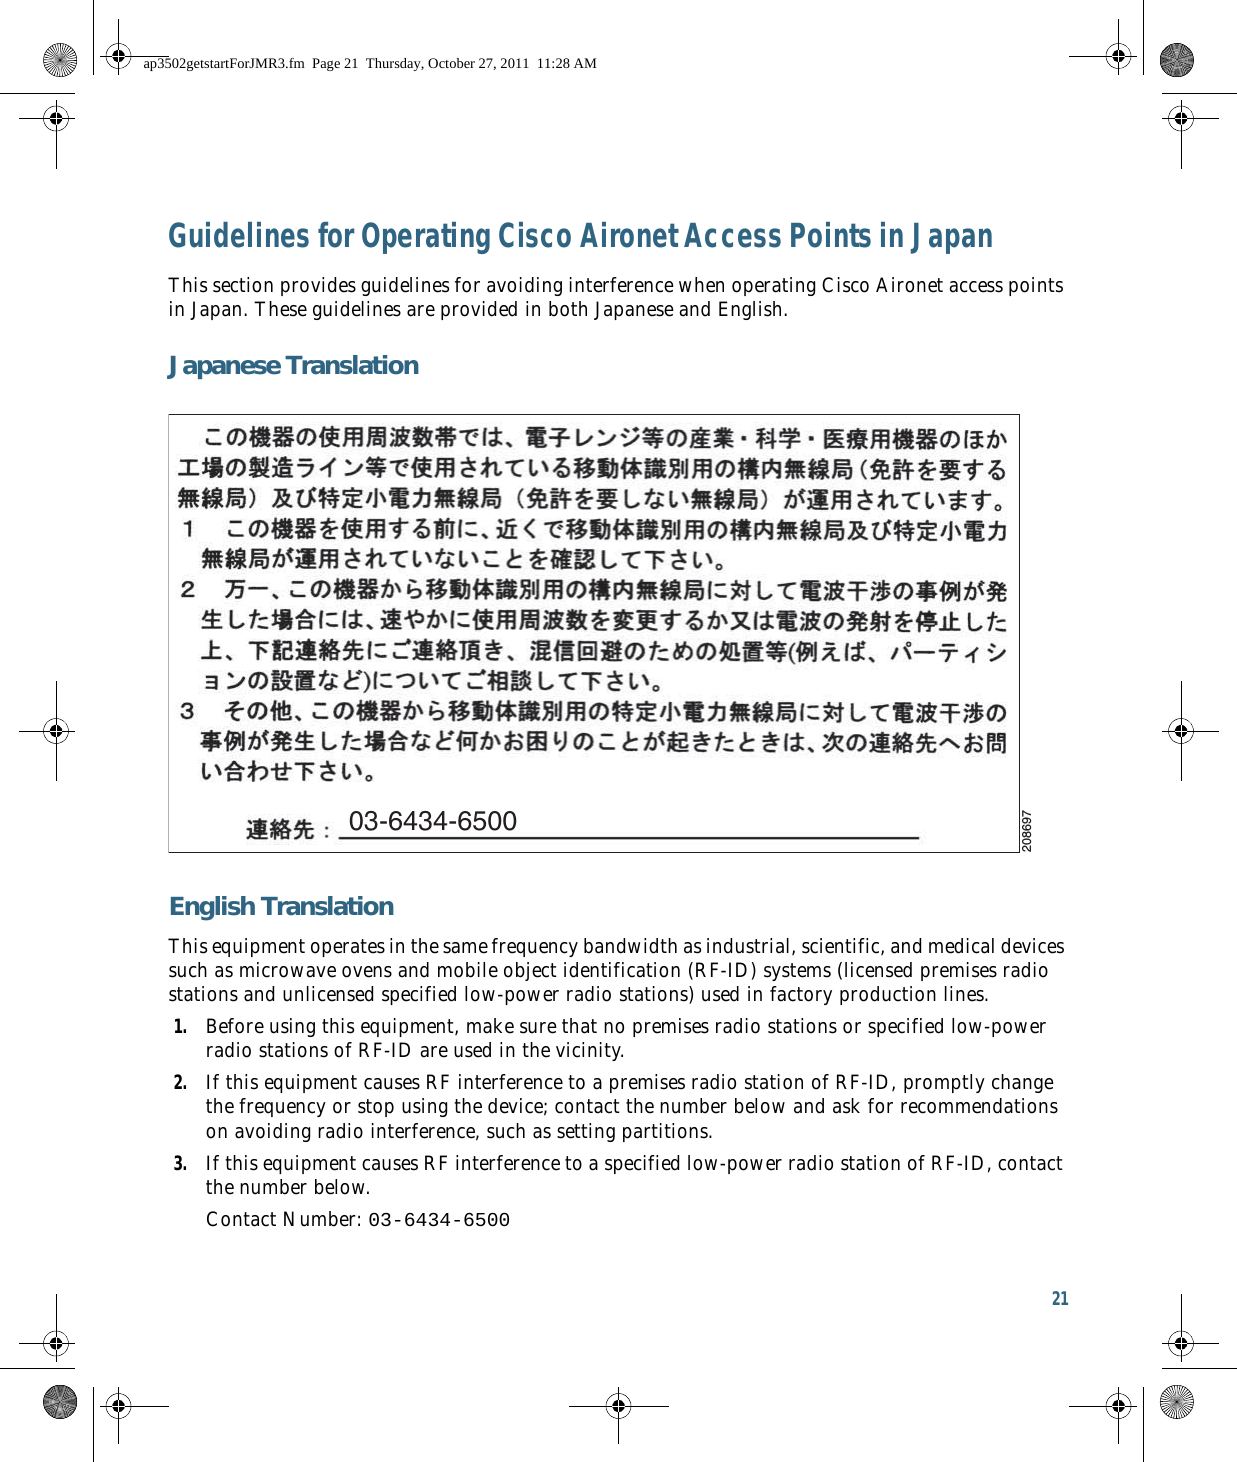 21 Guidelines for Operating Cisco Aironet Access Points in JapanThis section provides guidelines for avoiding interference when operating Cisco Aironet access points in Japan. These guidelines are provided in both Japanese and English.Japanese TranslationEnglish TranslationThis equipment operates in the same frequency bandwidth as industrial, scientific, and medical devices such as microwave ovens and mobile object identification (RF-ID) systems (licensed premises radio stations and unlicensed specified low-power radio stations) used in factory production lines.1. Before using this equipment, make sure that no premises radio stations or specified low-power radio stations of RF-ID are used in the vicinity.2. If this equipment causes RF interference to a premises radio station of RF-ID, promptly change the frequency or stop using the device; contact the number below and ask for recommendations on avoiding radio interference, such as setting partitions.3. If this equipment causes RF interference to a specified low-power radio station of RF-ID, contact the number below.Contact Number: 03-6434-650003-6434-6500208697ap3502getstartForJMR3.fm  Page 21  Thursday, October 27, 2011  11:28 AM